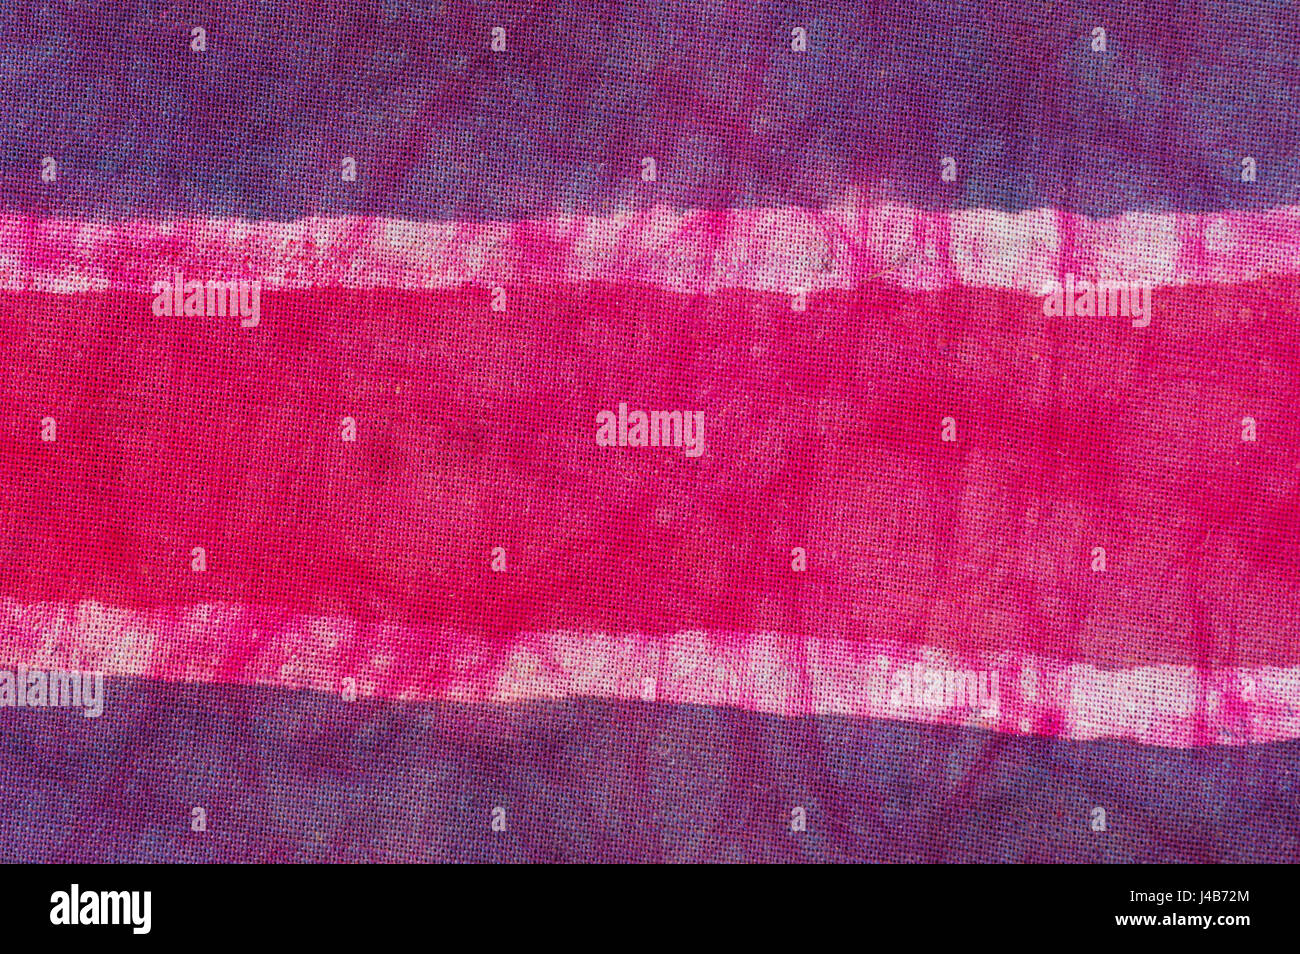 Pink Tie Dye Batik Fabric For Background And Texture Stock Photo